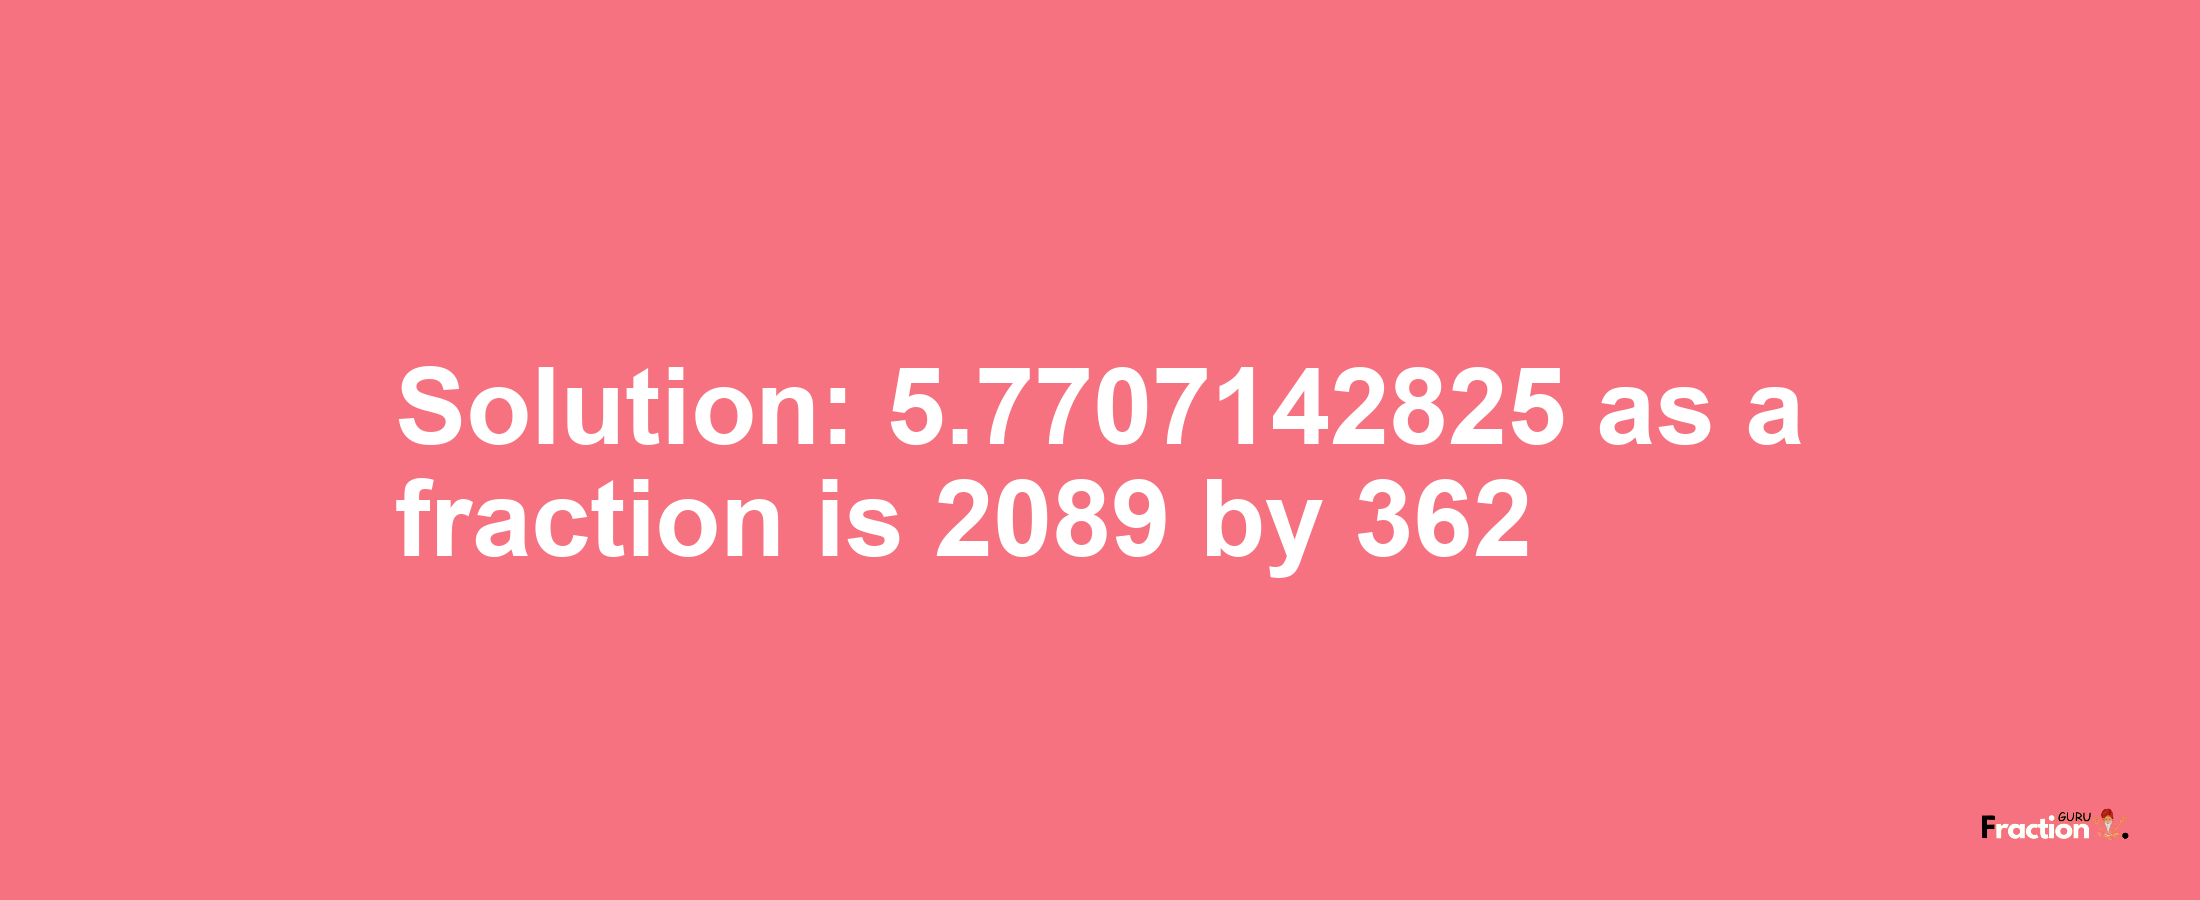 Solution:5.7707142825 as a fraction is 2089/362